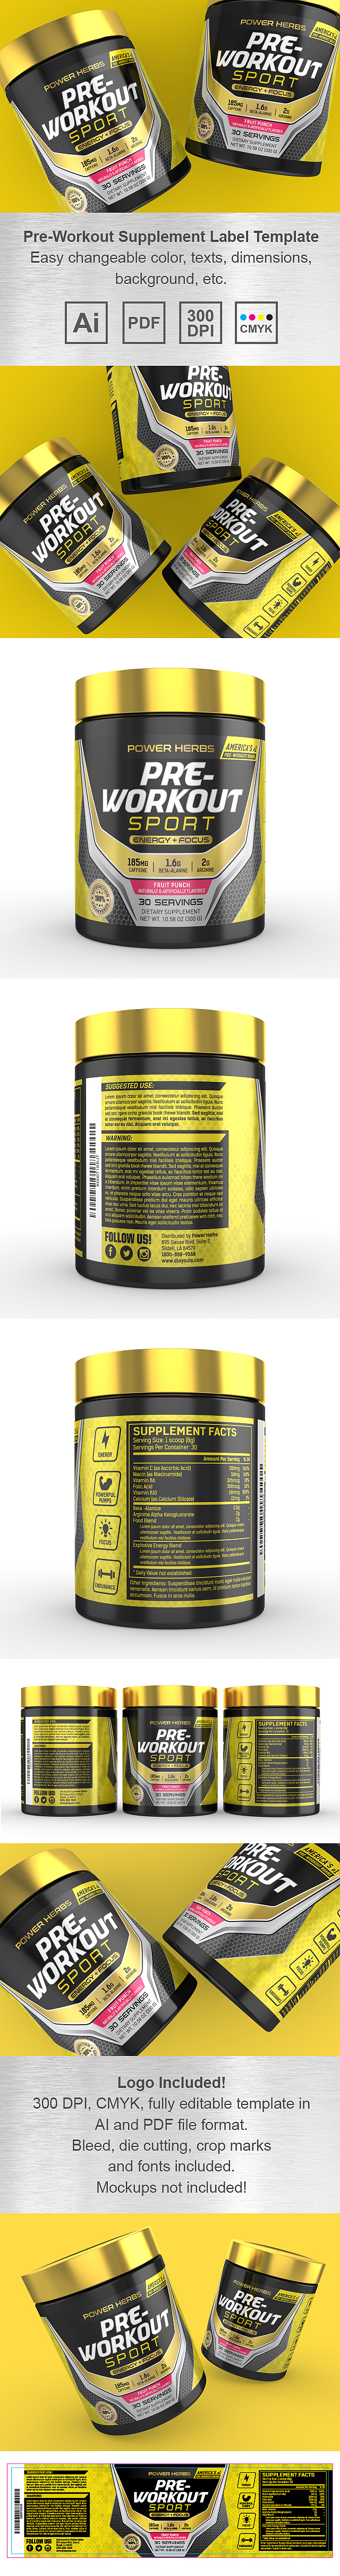 Pre Workout Powder Supplement Label Template